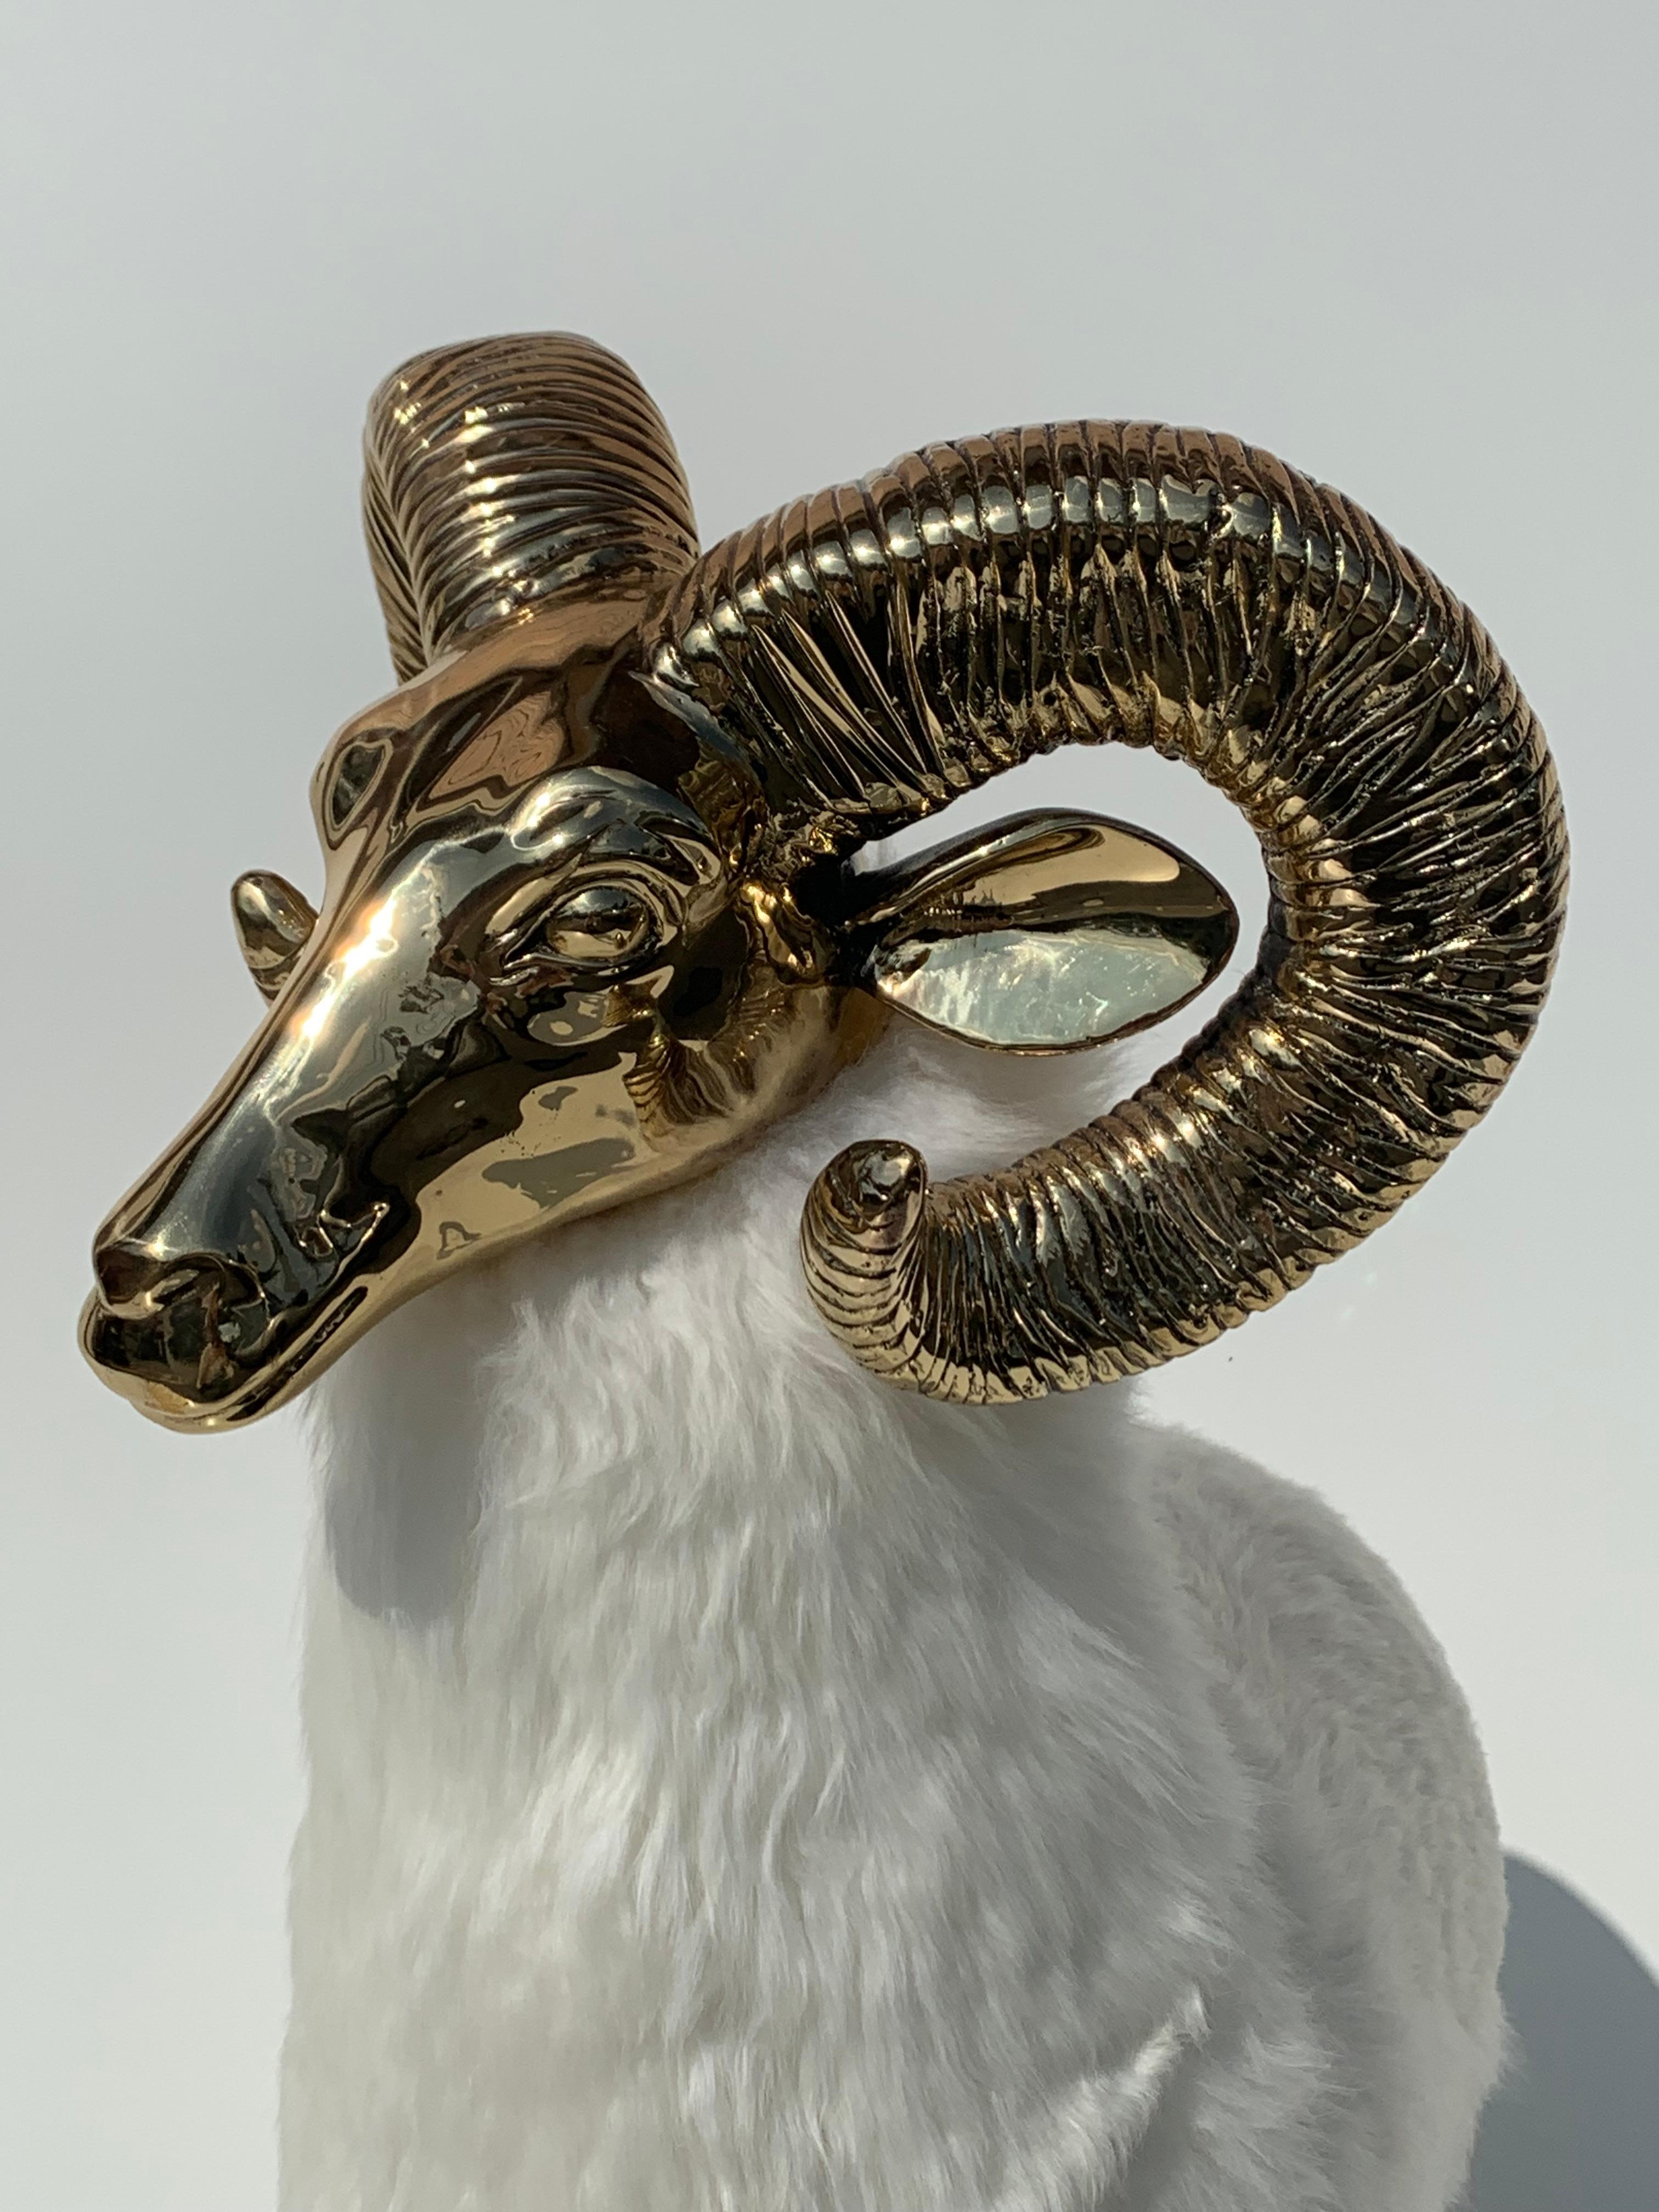 Polished Brass Ram or Sheep Sculpture 1